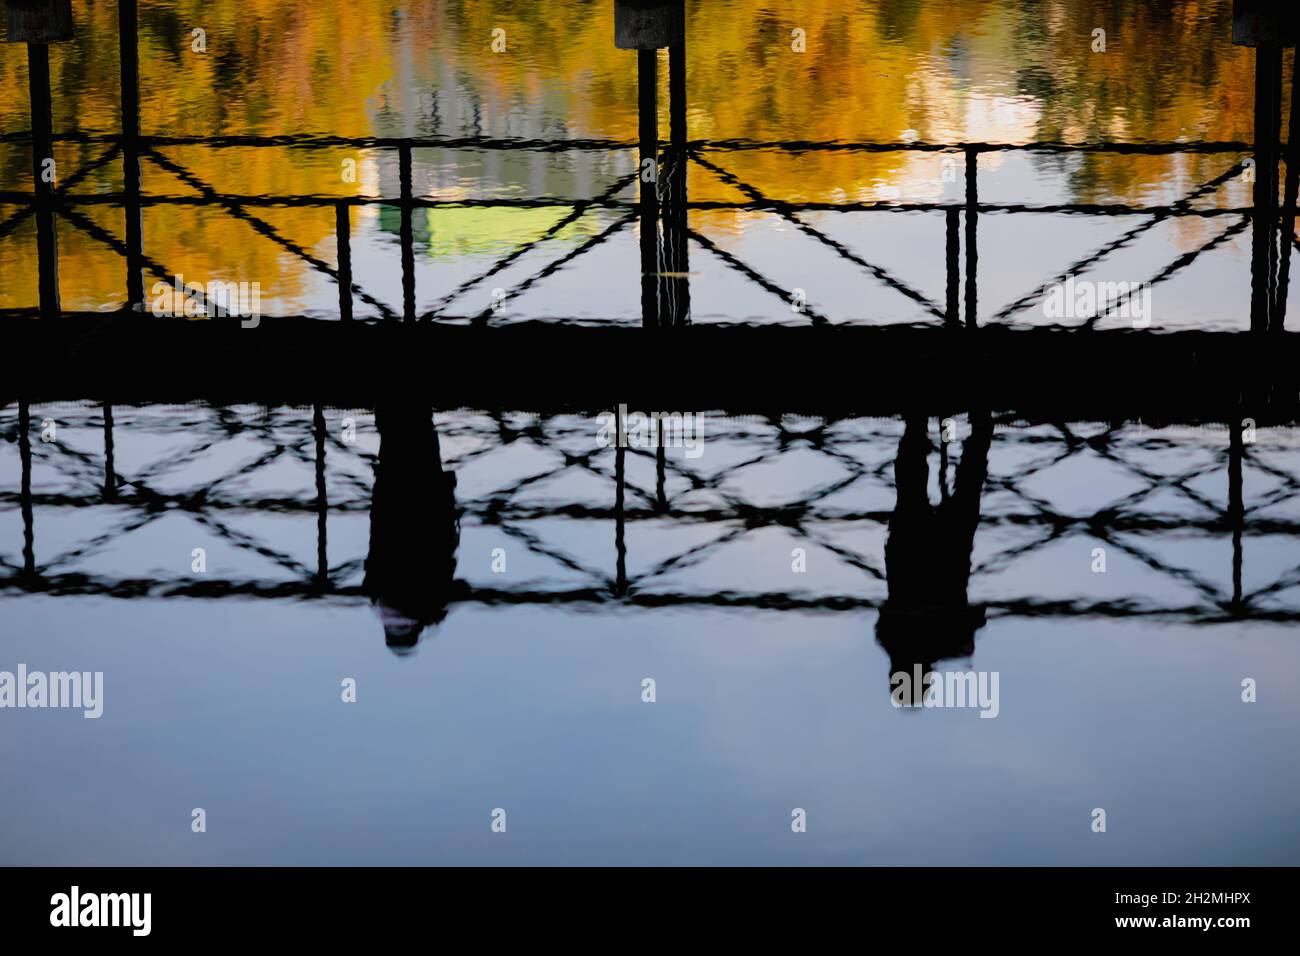 Reflection in water of people walking over a pedestrian bridge in a park during a sunny autumn day. Stock Photo